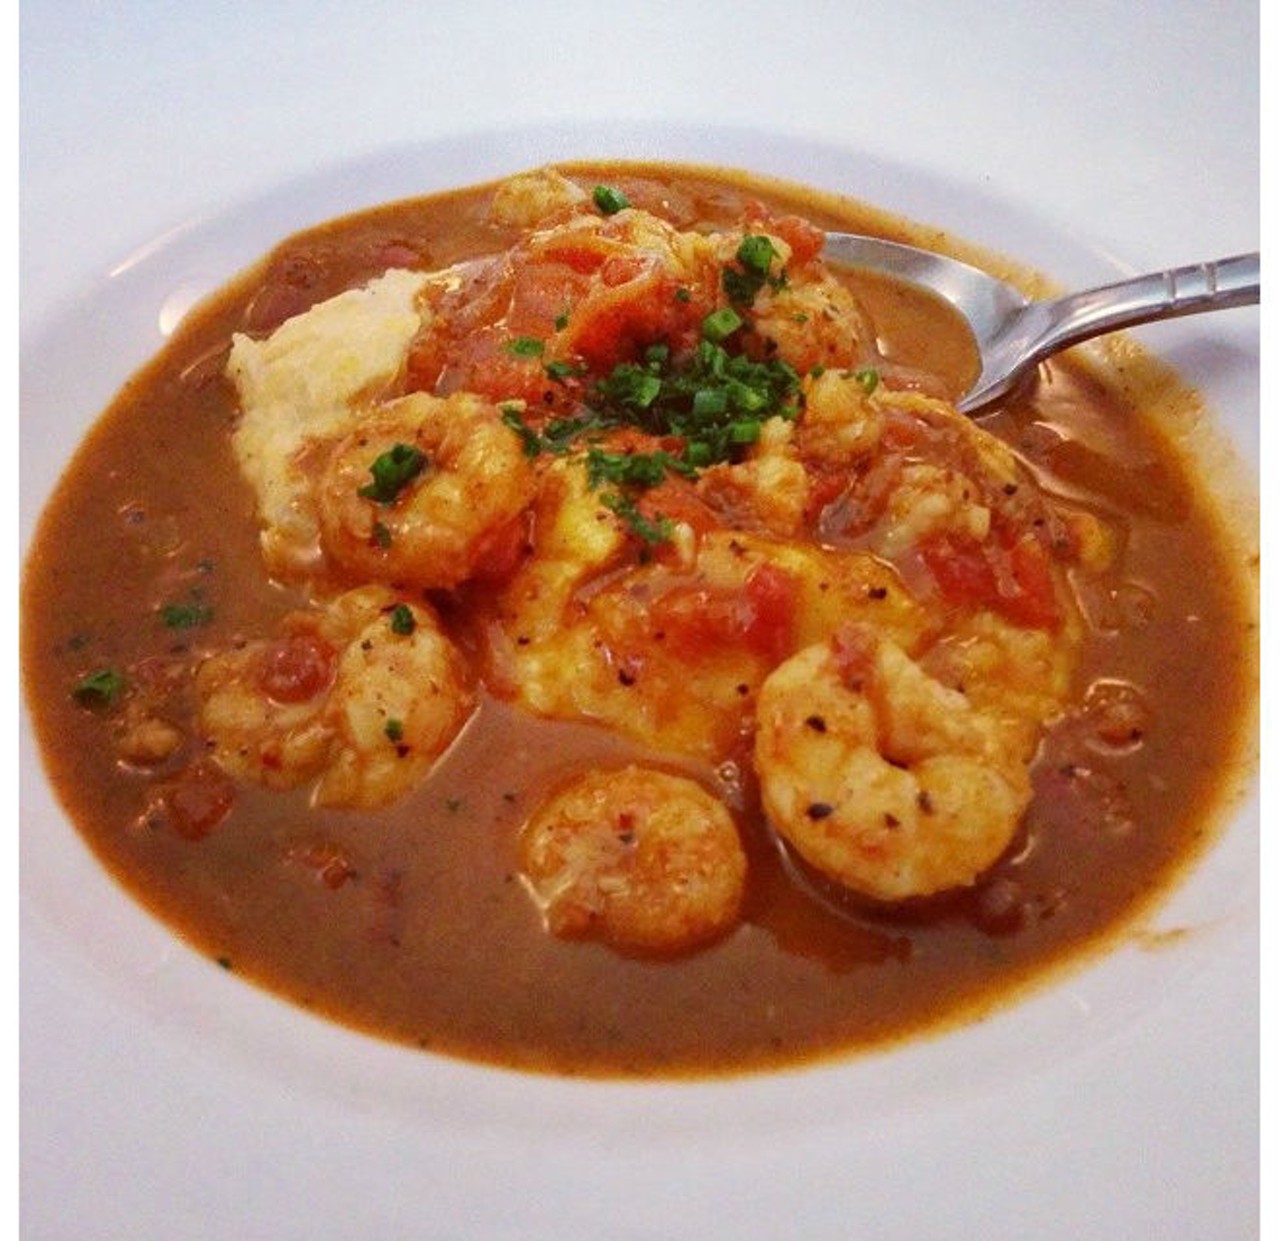 Creole BBQ: Cape Canaveral royal red shrimp, Bradley's Country Store white grits, Creole spice from K Restaurant (via Instagram user @shadeofmelon)